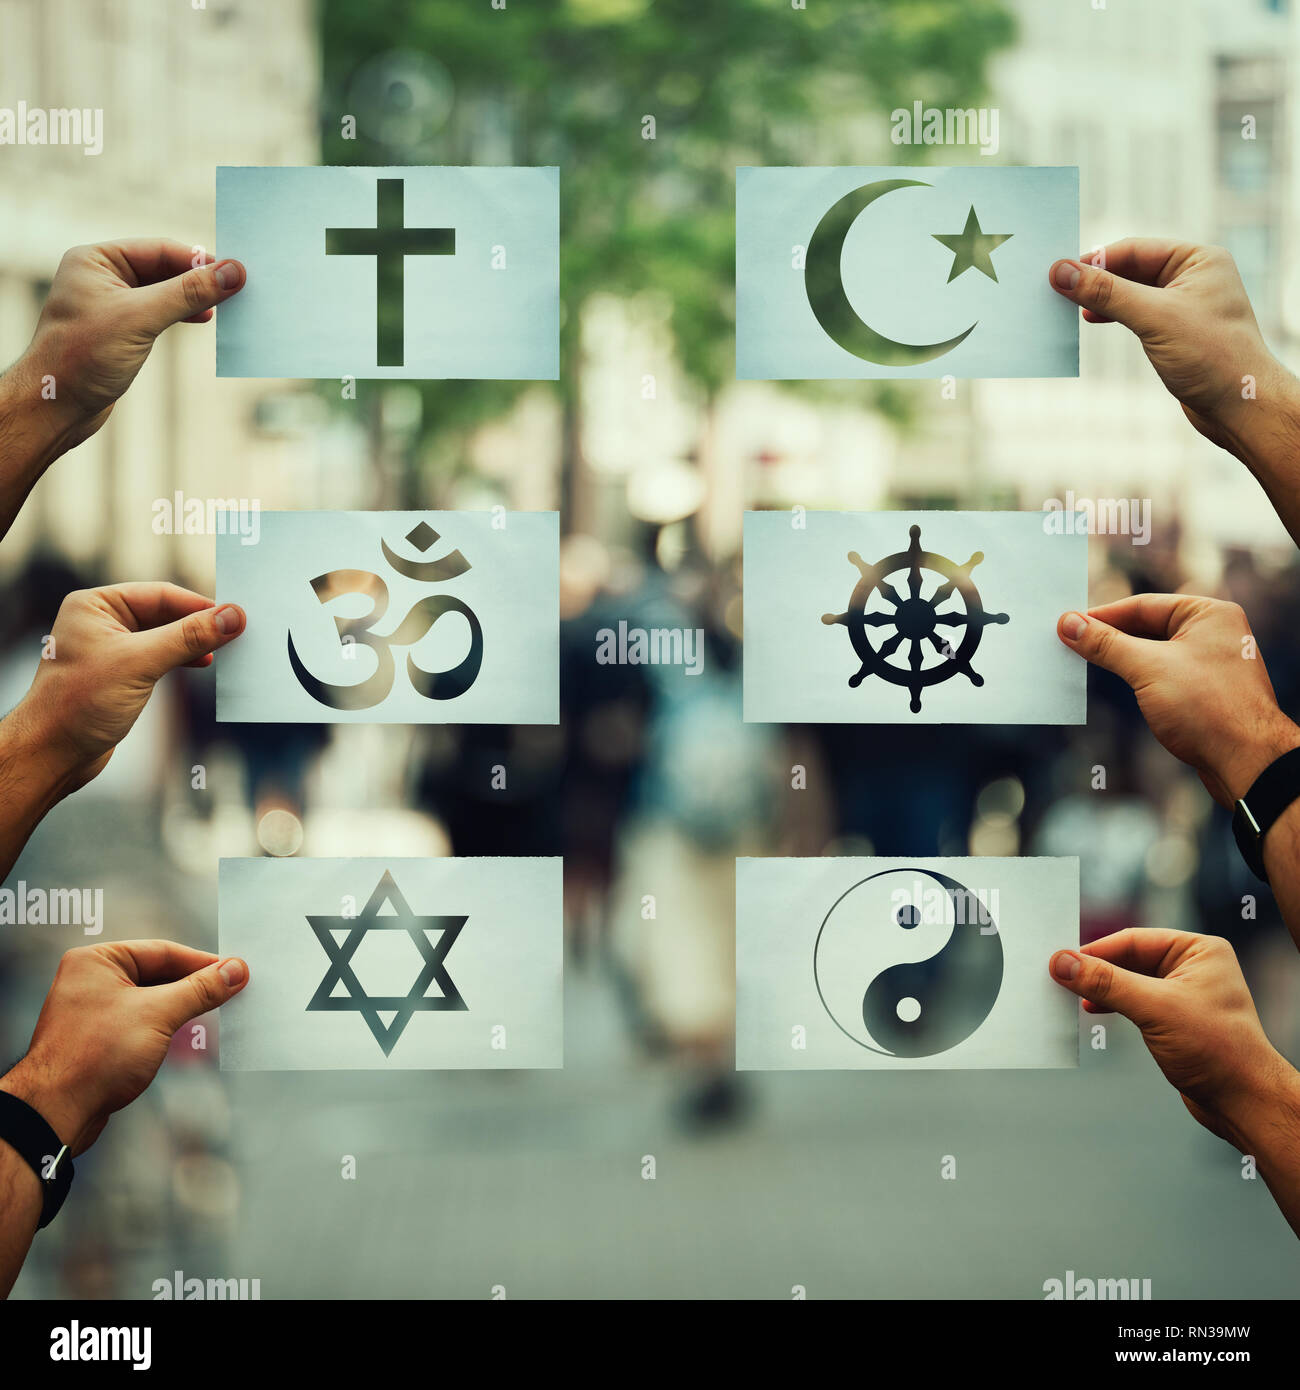 Religion conflicts as global issue concept. Human hands holding different paper with faith symbols over crowded street scene. Relations between differ Stock Photo